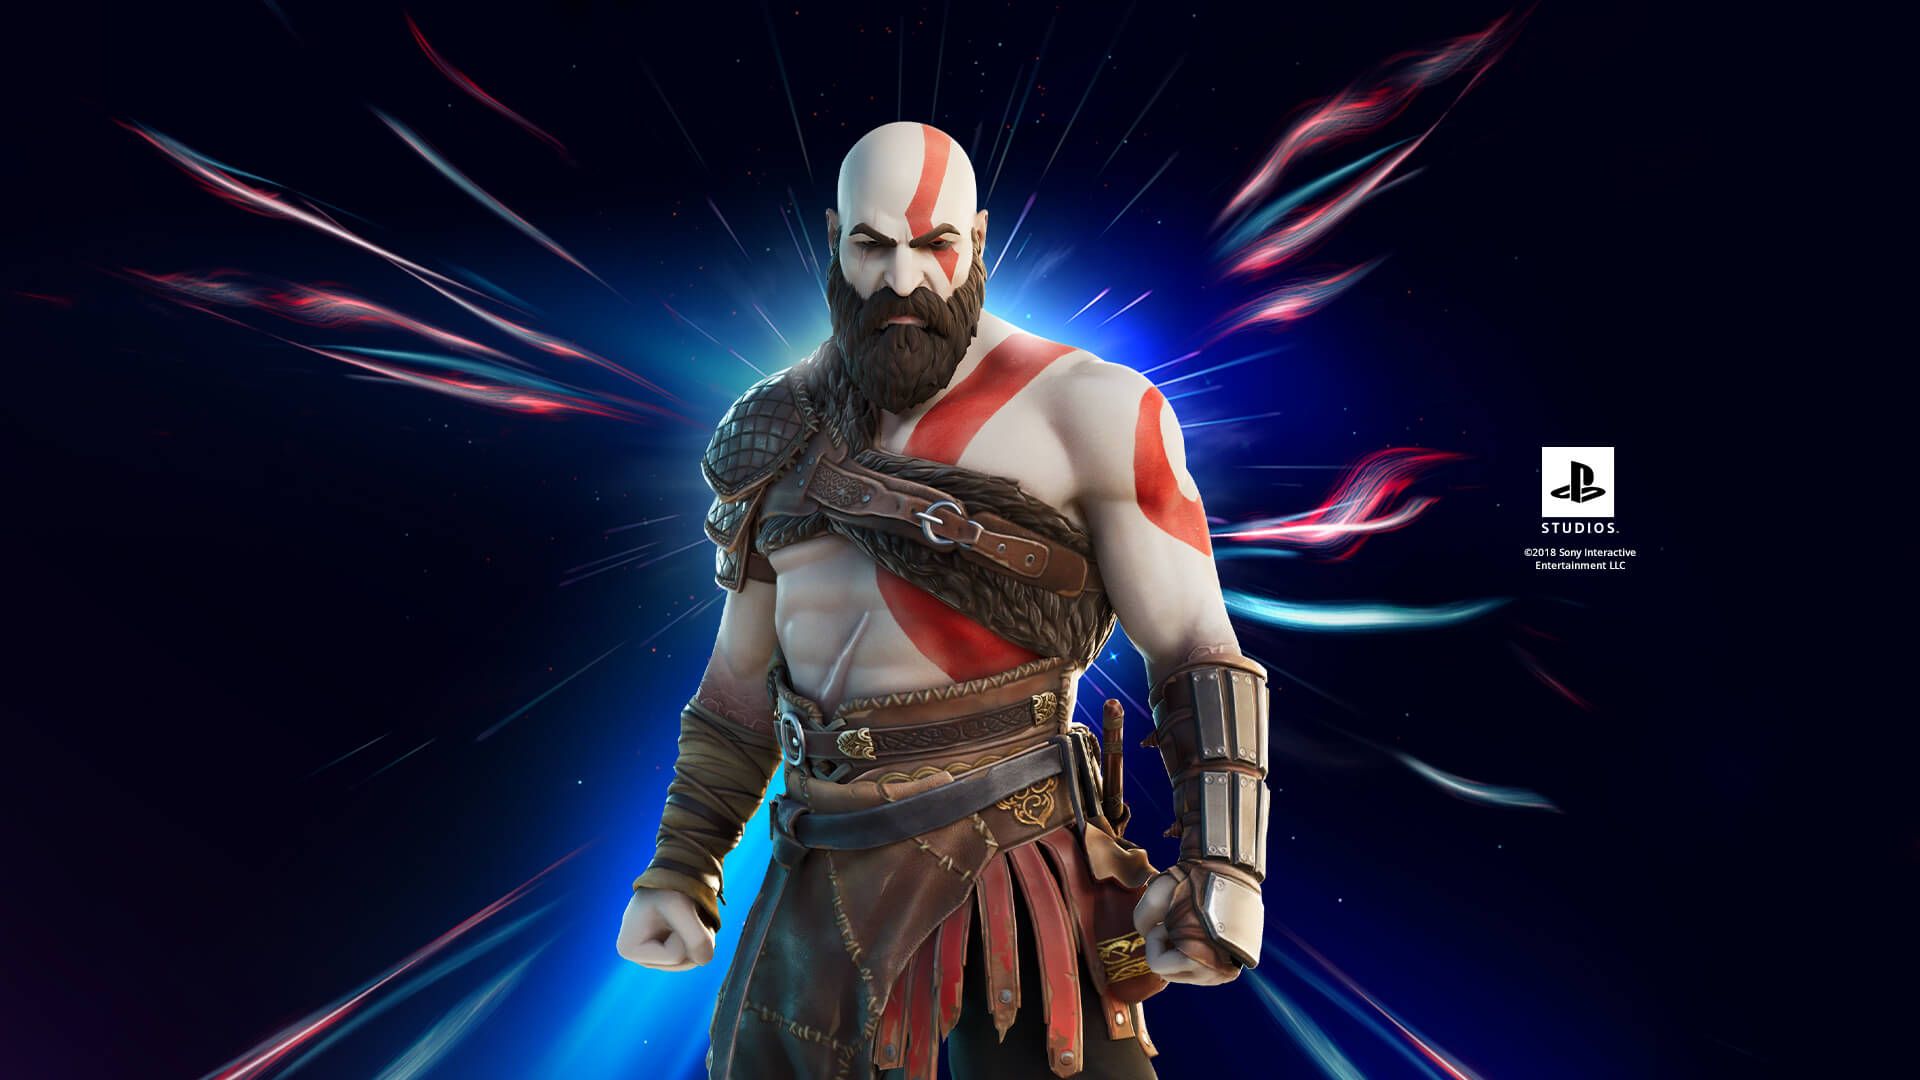 Kratos Joins the Hunt in Fortnite Chapter 2 Season 5